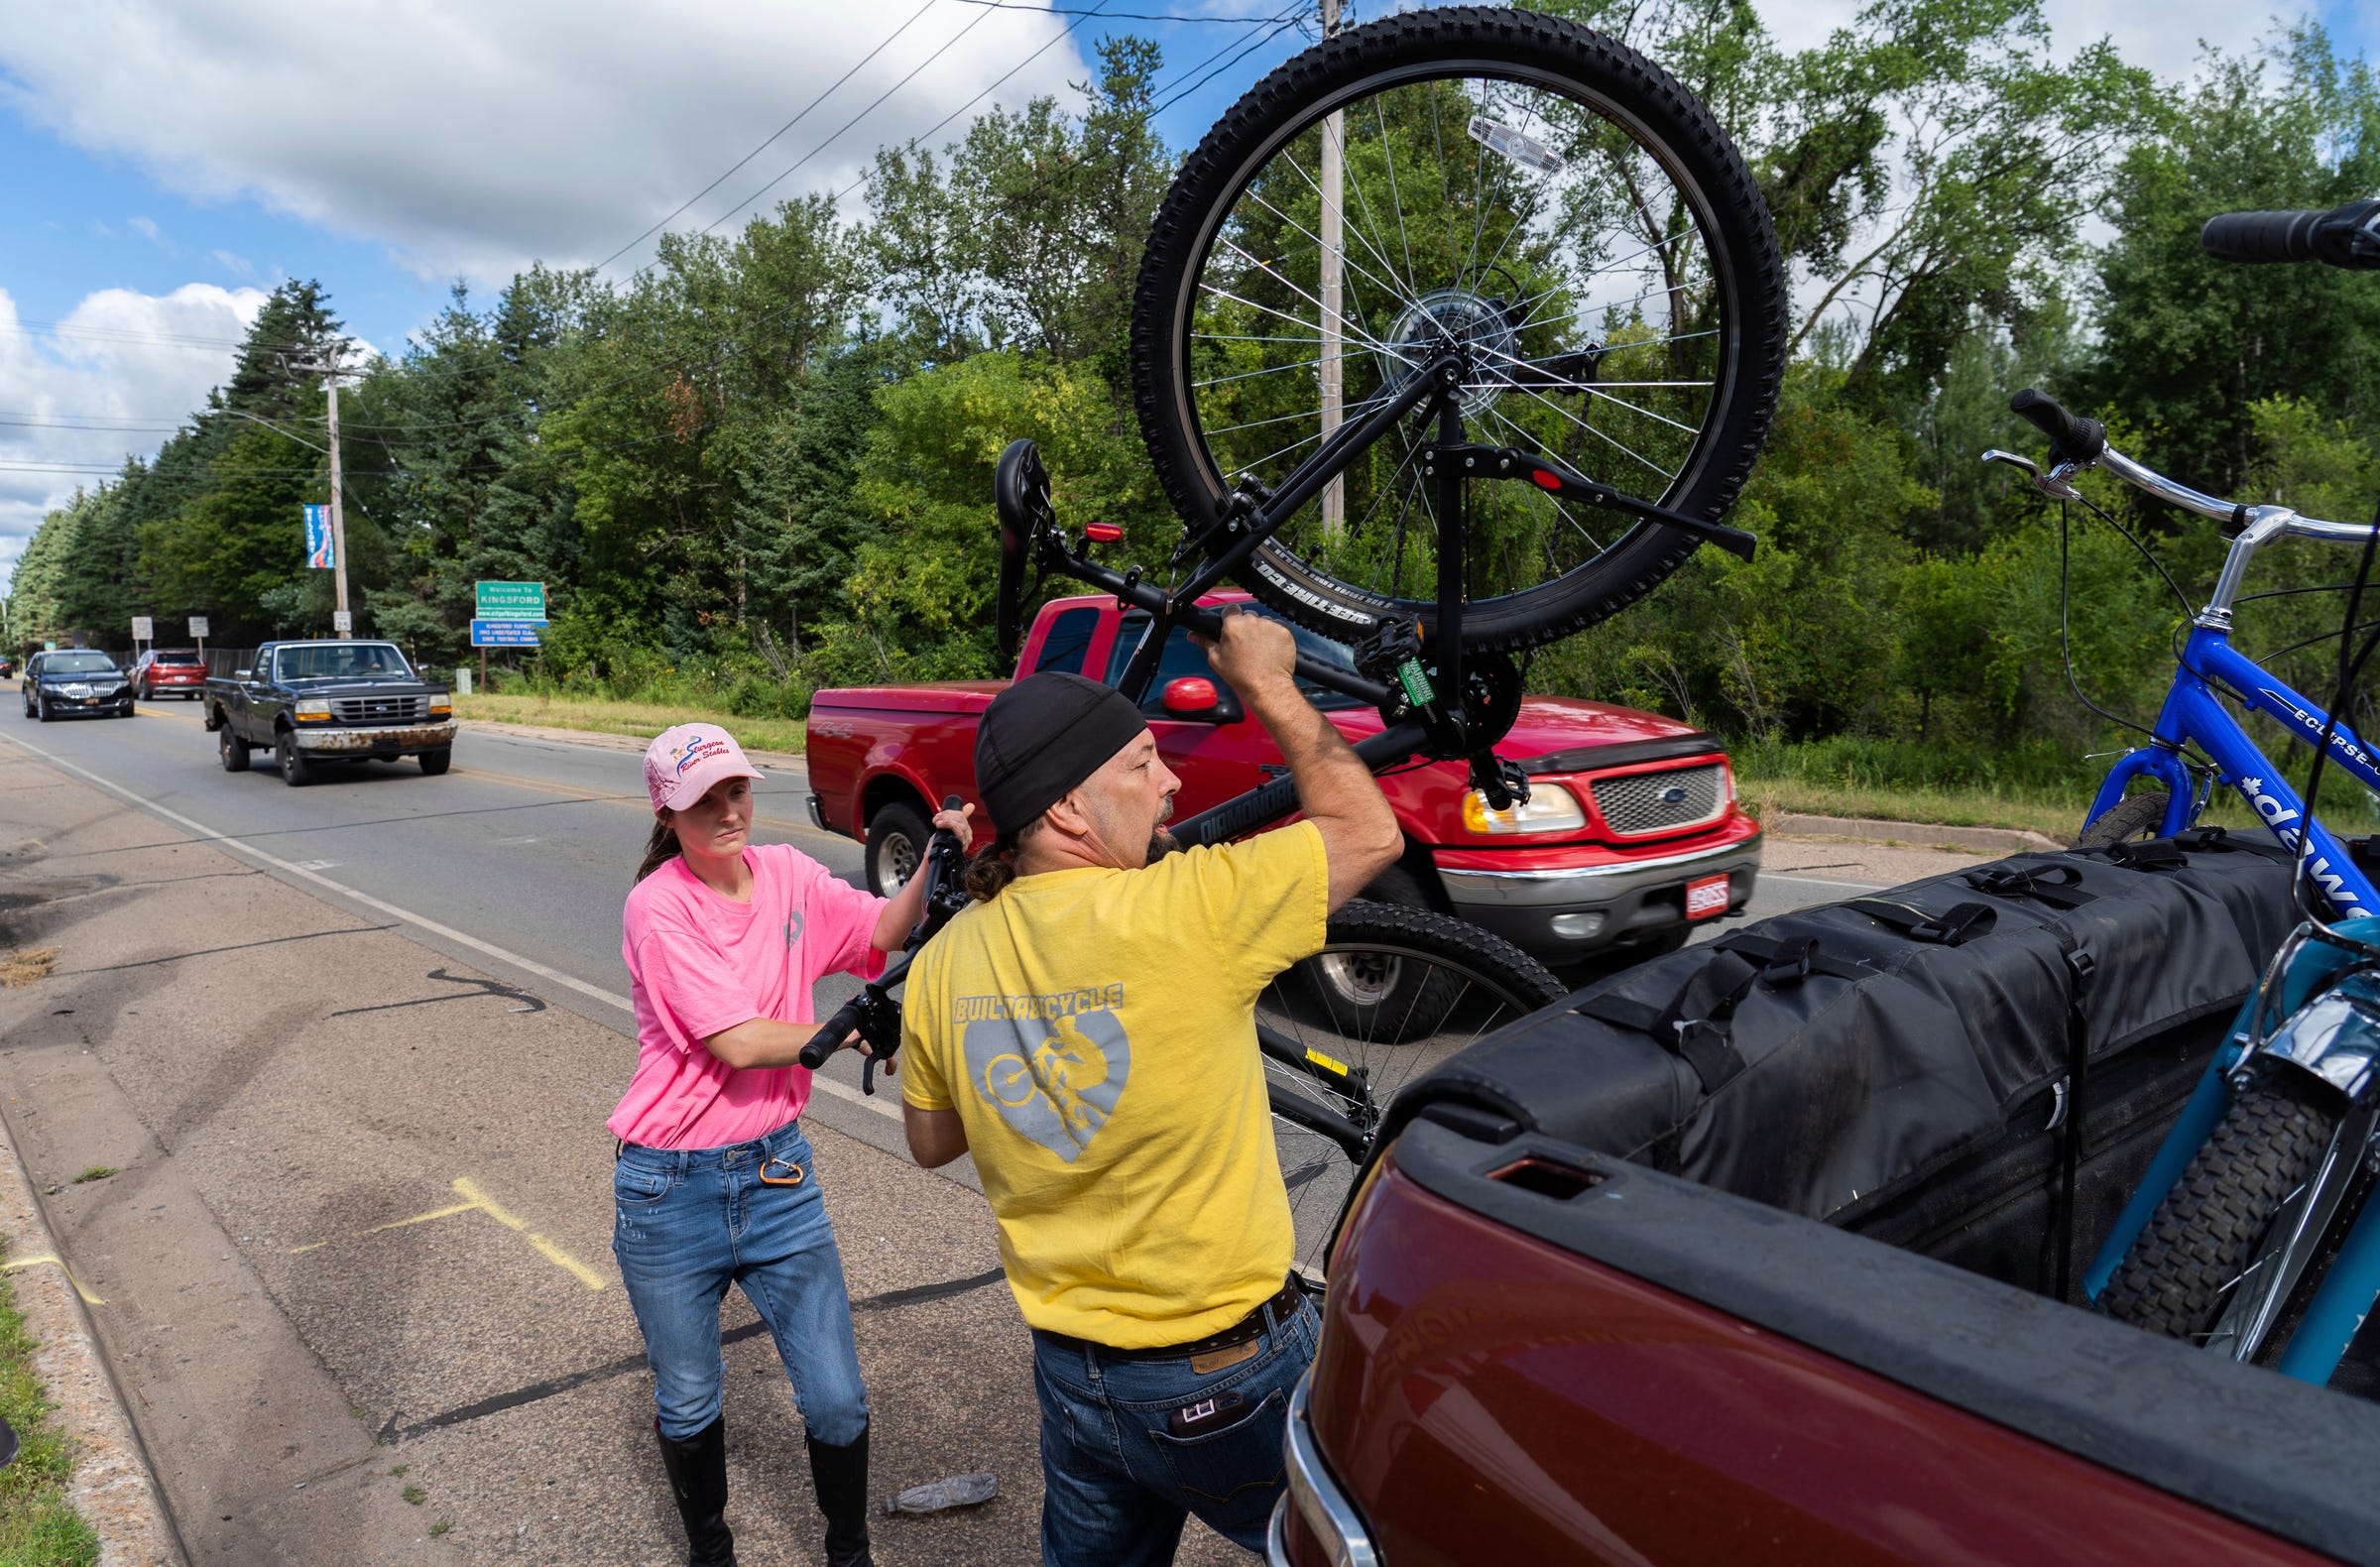 Steven Pringle, owner of Build a Bicycle - Bicycle Therapy, and his girlfriend Lindsey Gagne load bikes into the back of his truck to be donated to nuns of the Carmelite Monastery of the Holy Cross in Iron Mountain on Friday, July 29, 2022. 